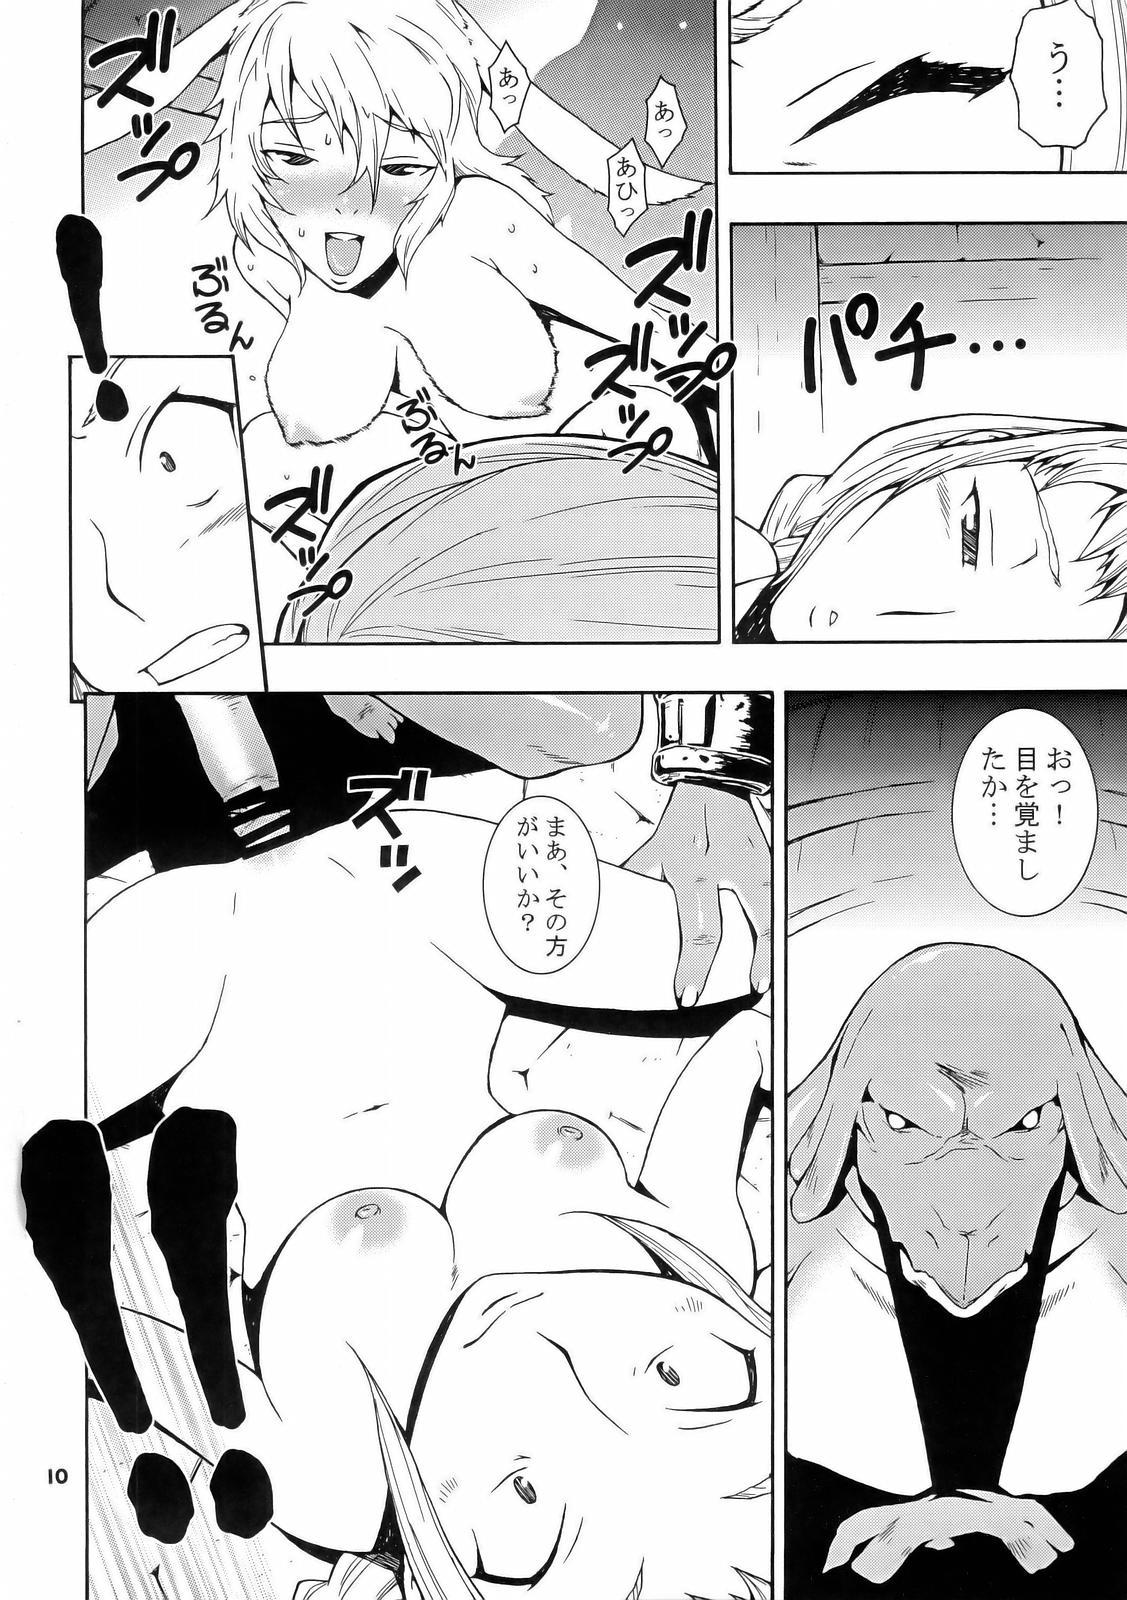 Teenpussy H-H - Final fantasy xii Massage Creep - Page 9